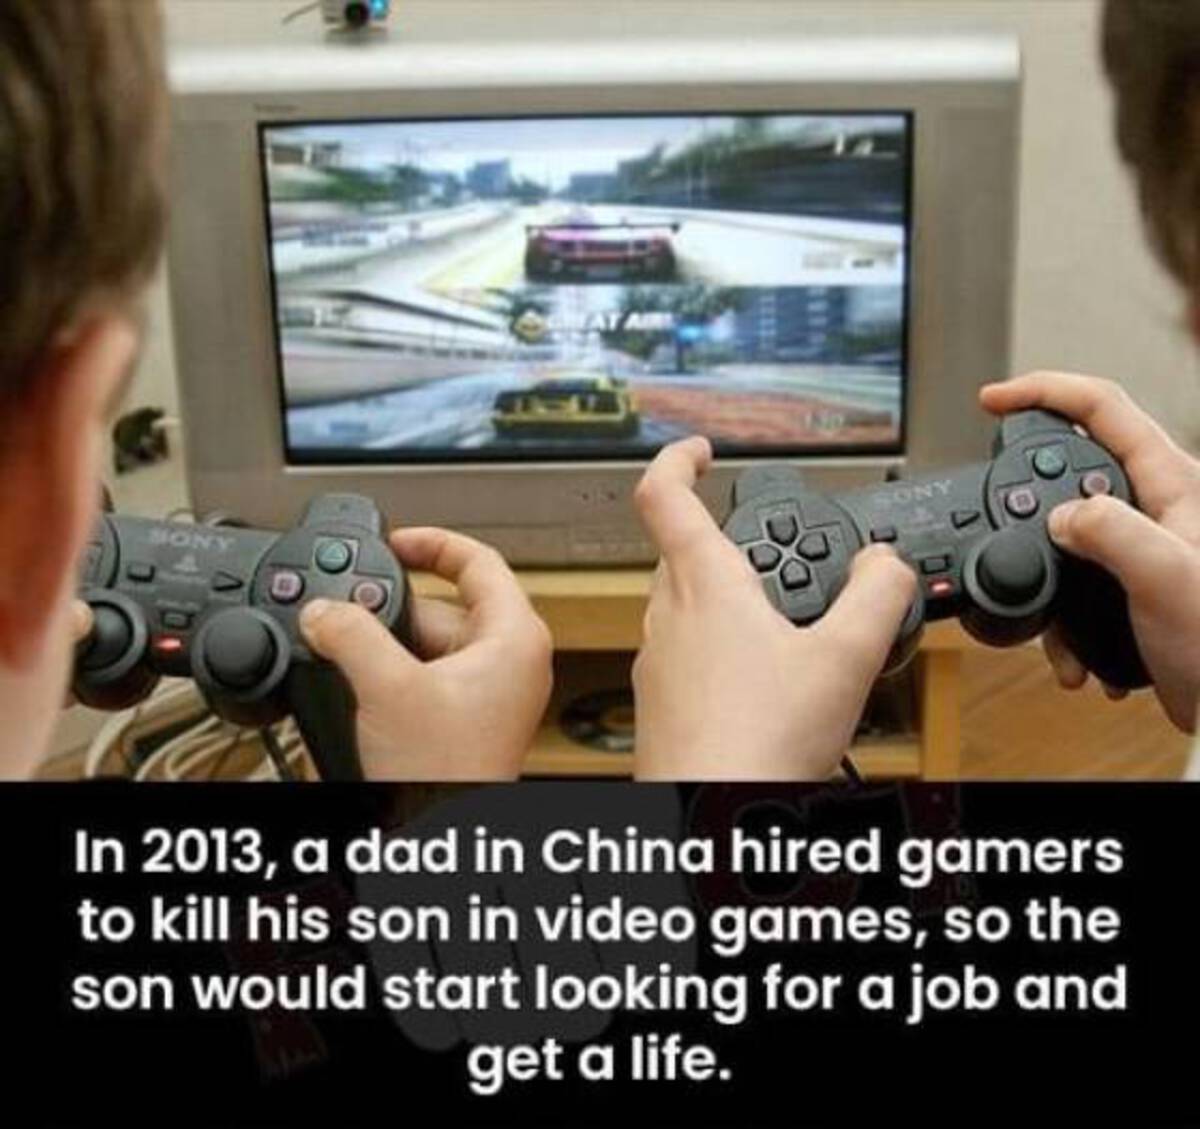 Sony In 2013, a dad in China hired gamers to kill his son in video games, so the son would start looking for a job and get a life.